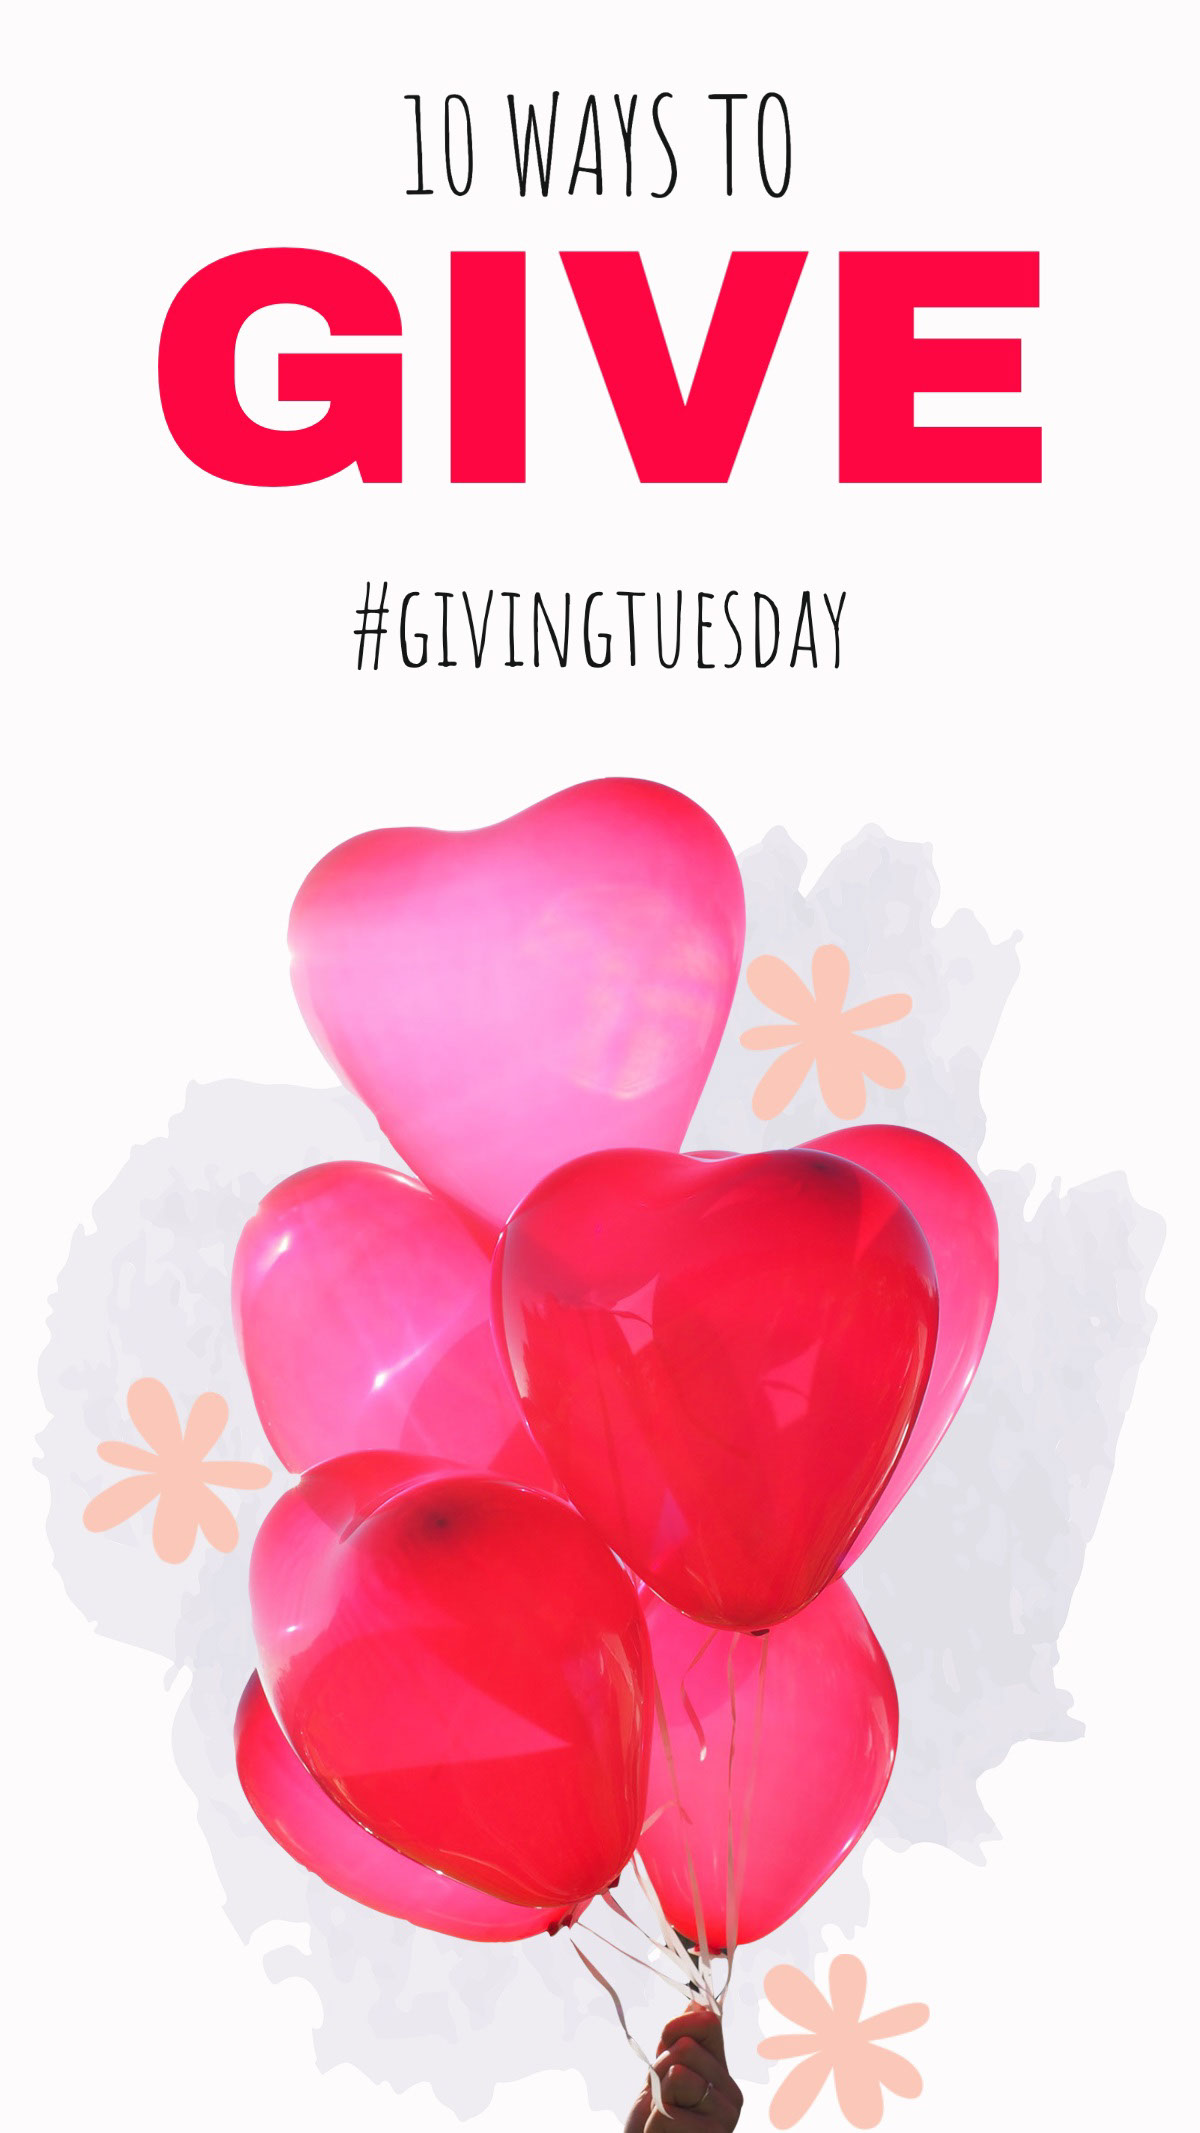 Cream and Red Giving Tuesday Instagram Story GIVE 10 WAYS TO #givingtuesday